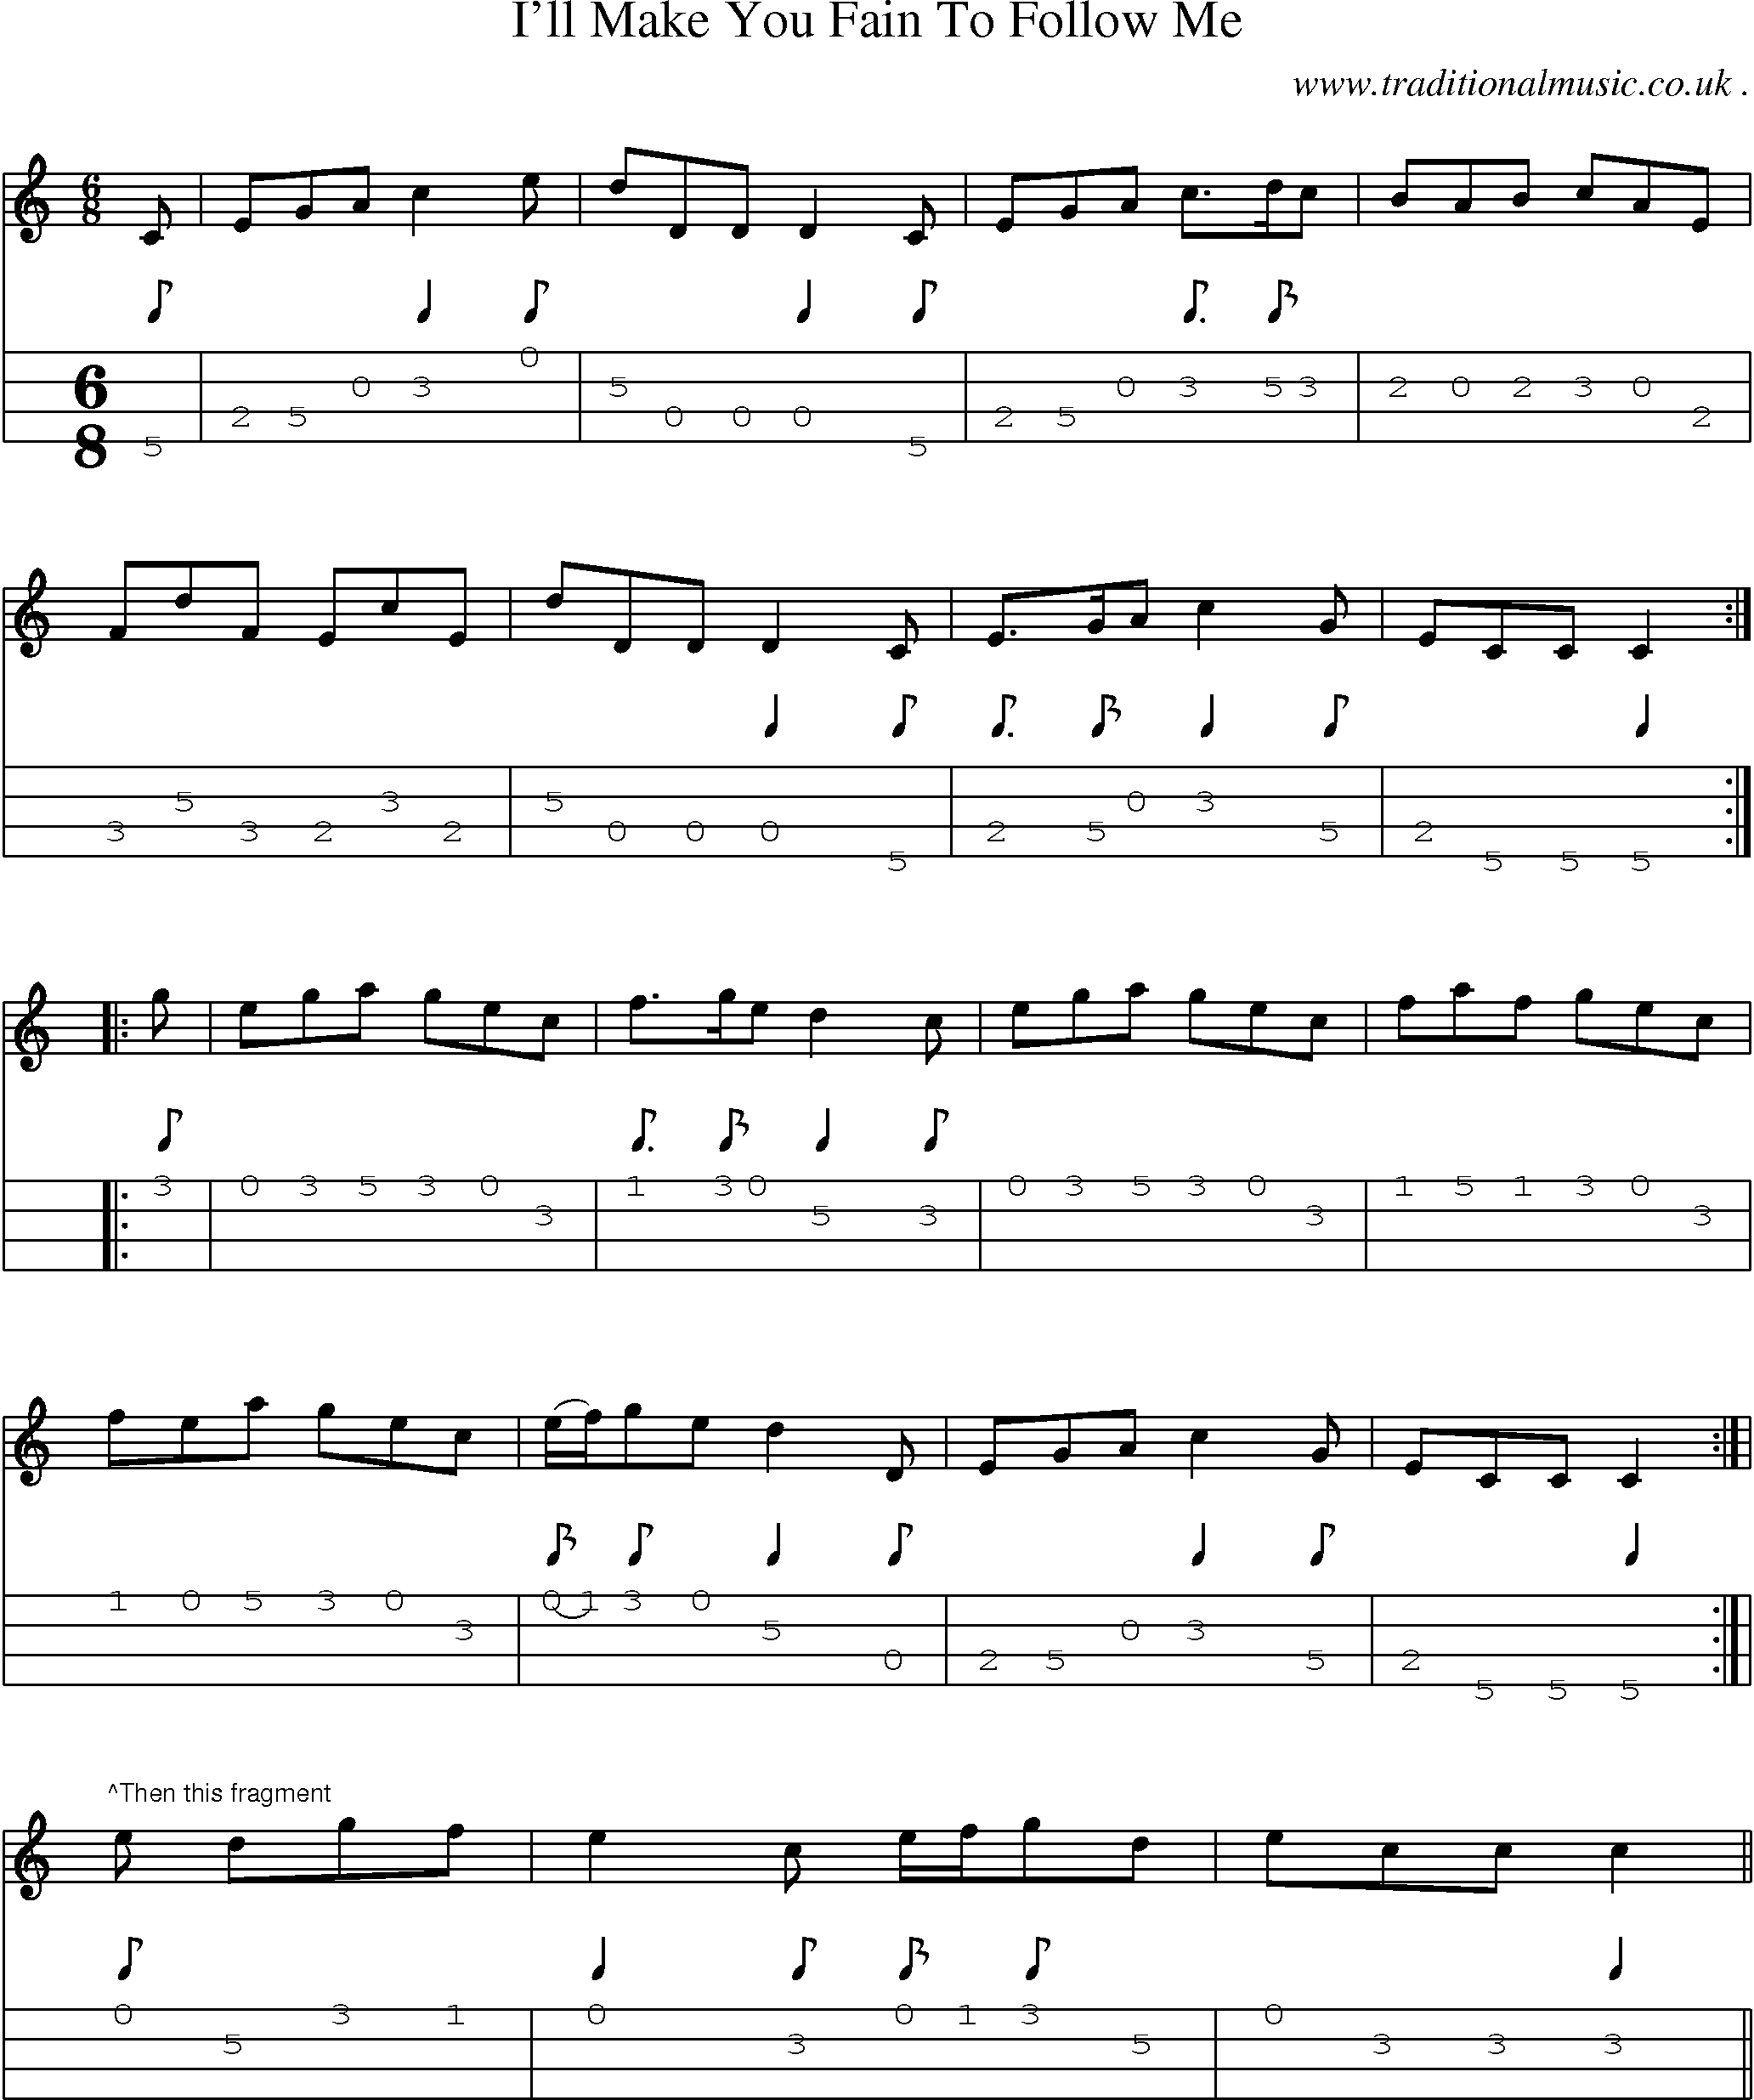 Sheet-Music and Mandolin Tabs for Ill Make You Fain To Follow Me